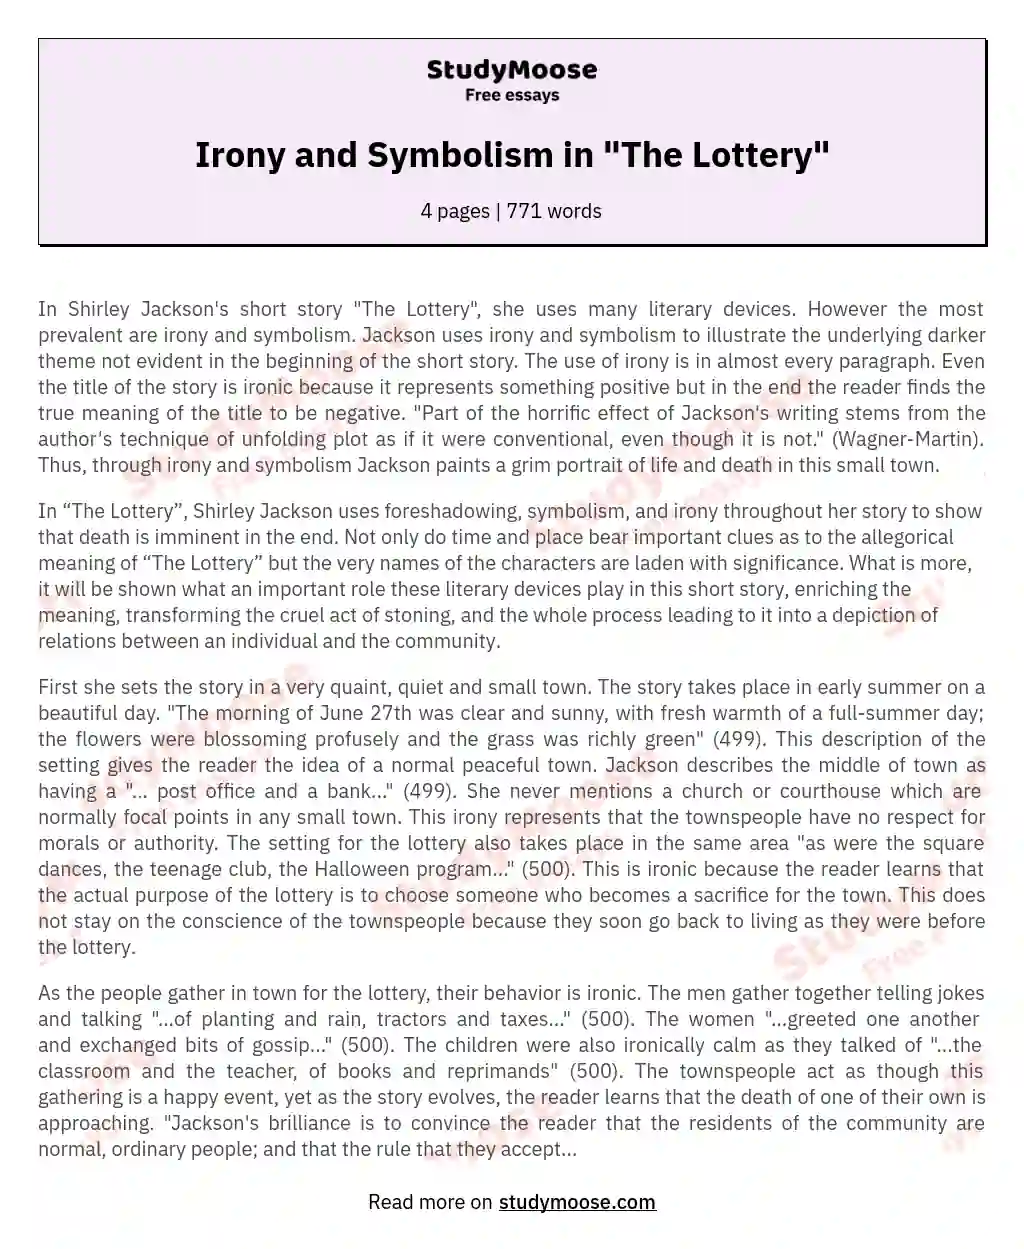 Irony and Symbolism in "The Lottery" essay